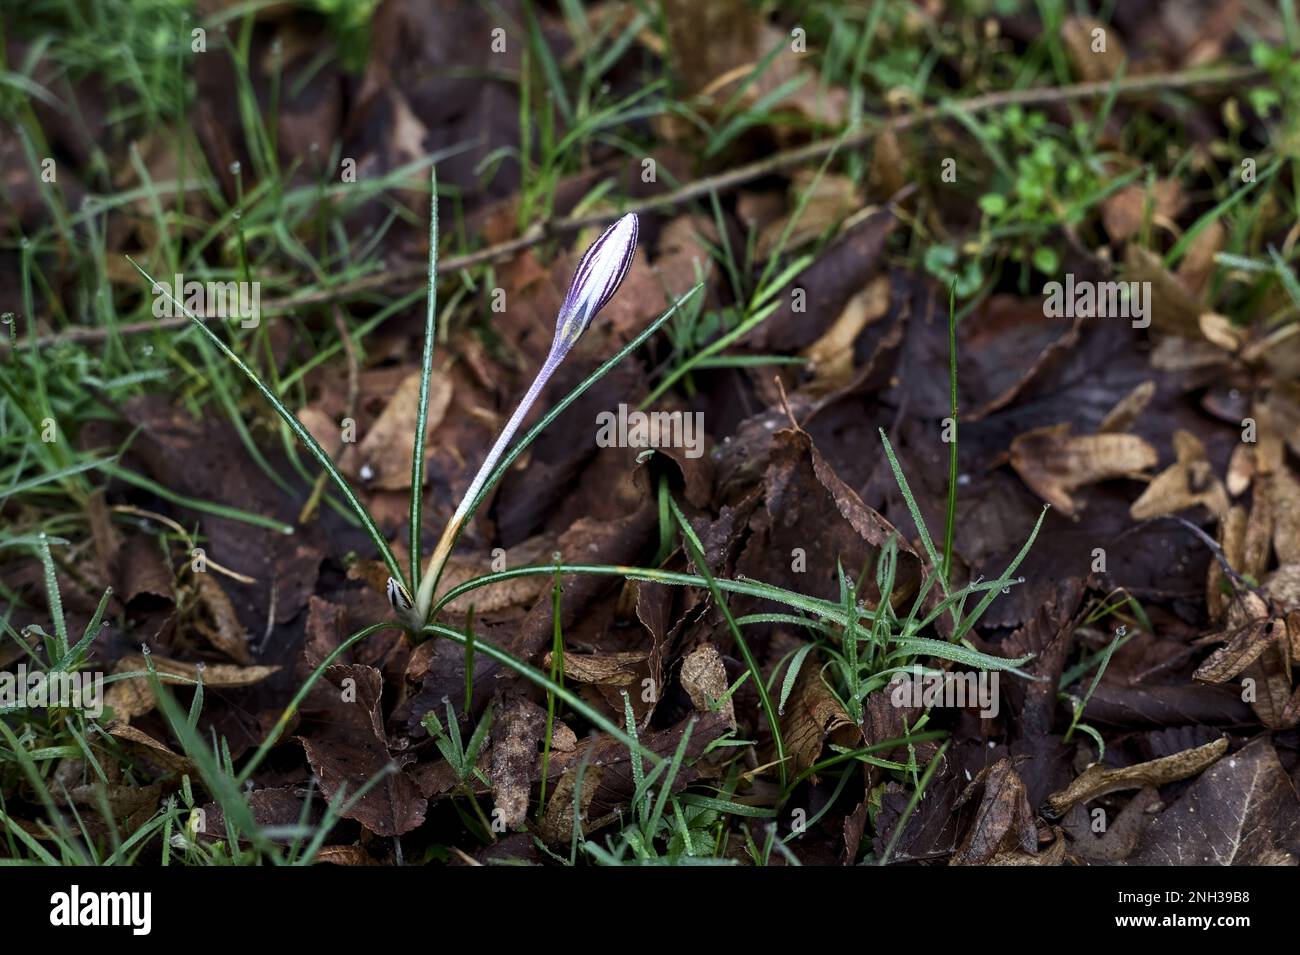 Crocus  biflorus with grass and foliage seen up close Stock Photo